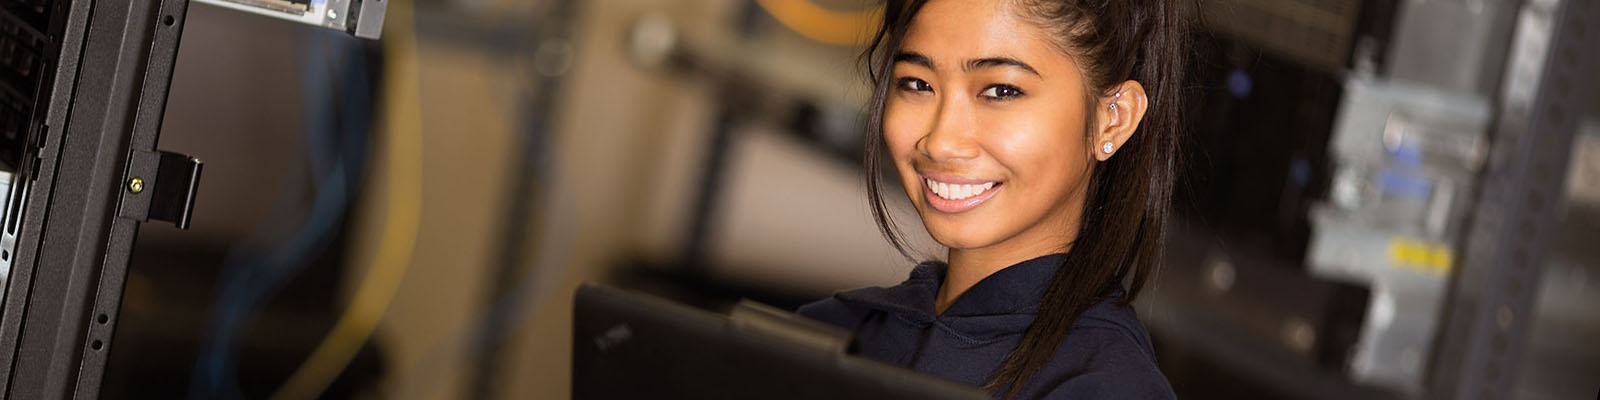 Young woman smiling in server room